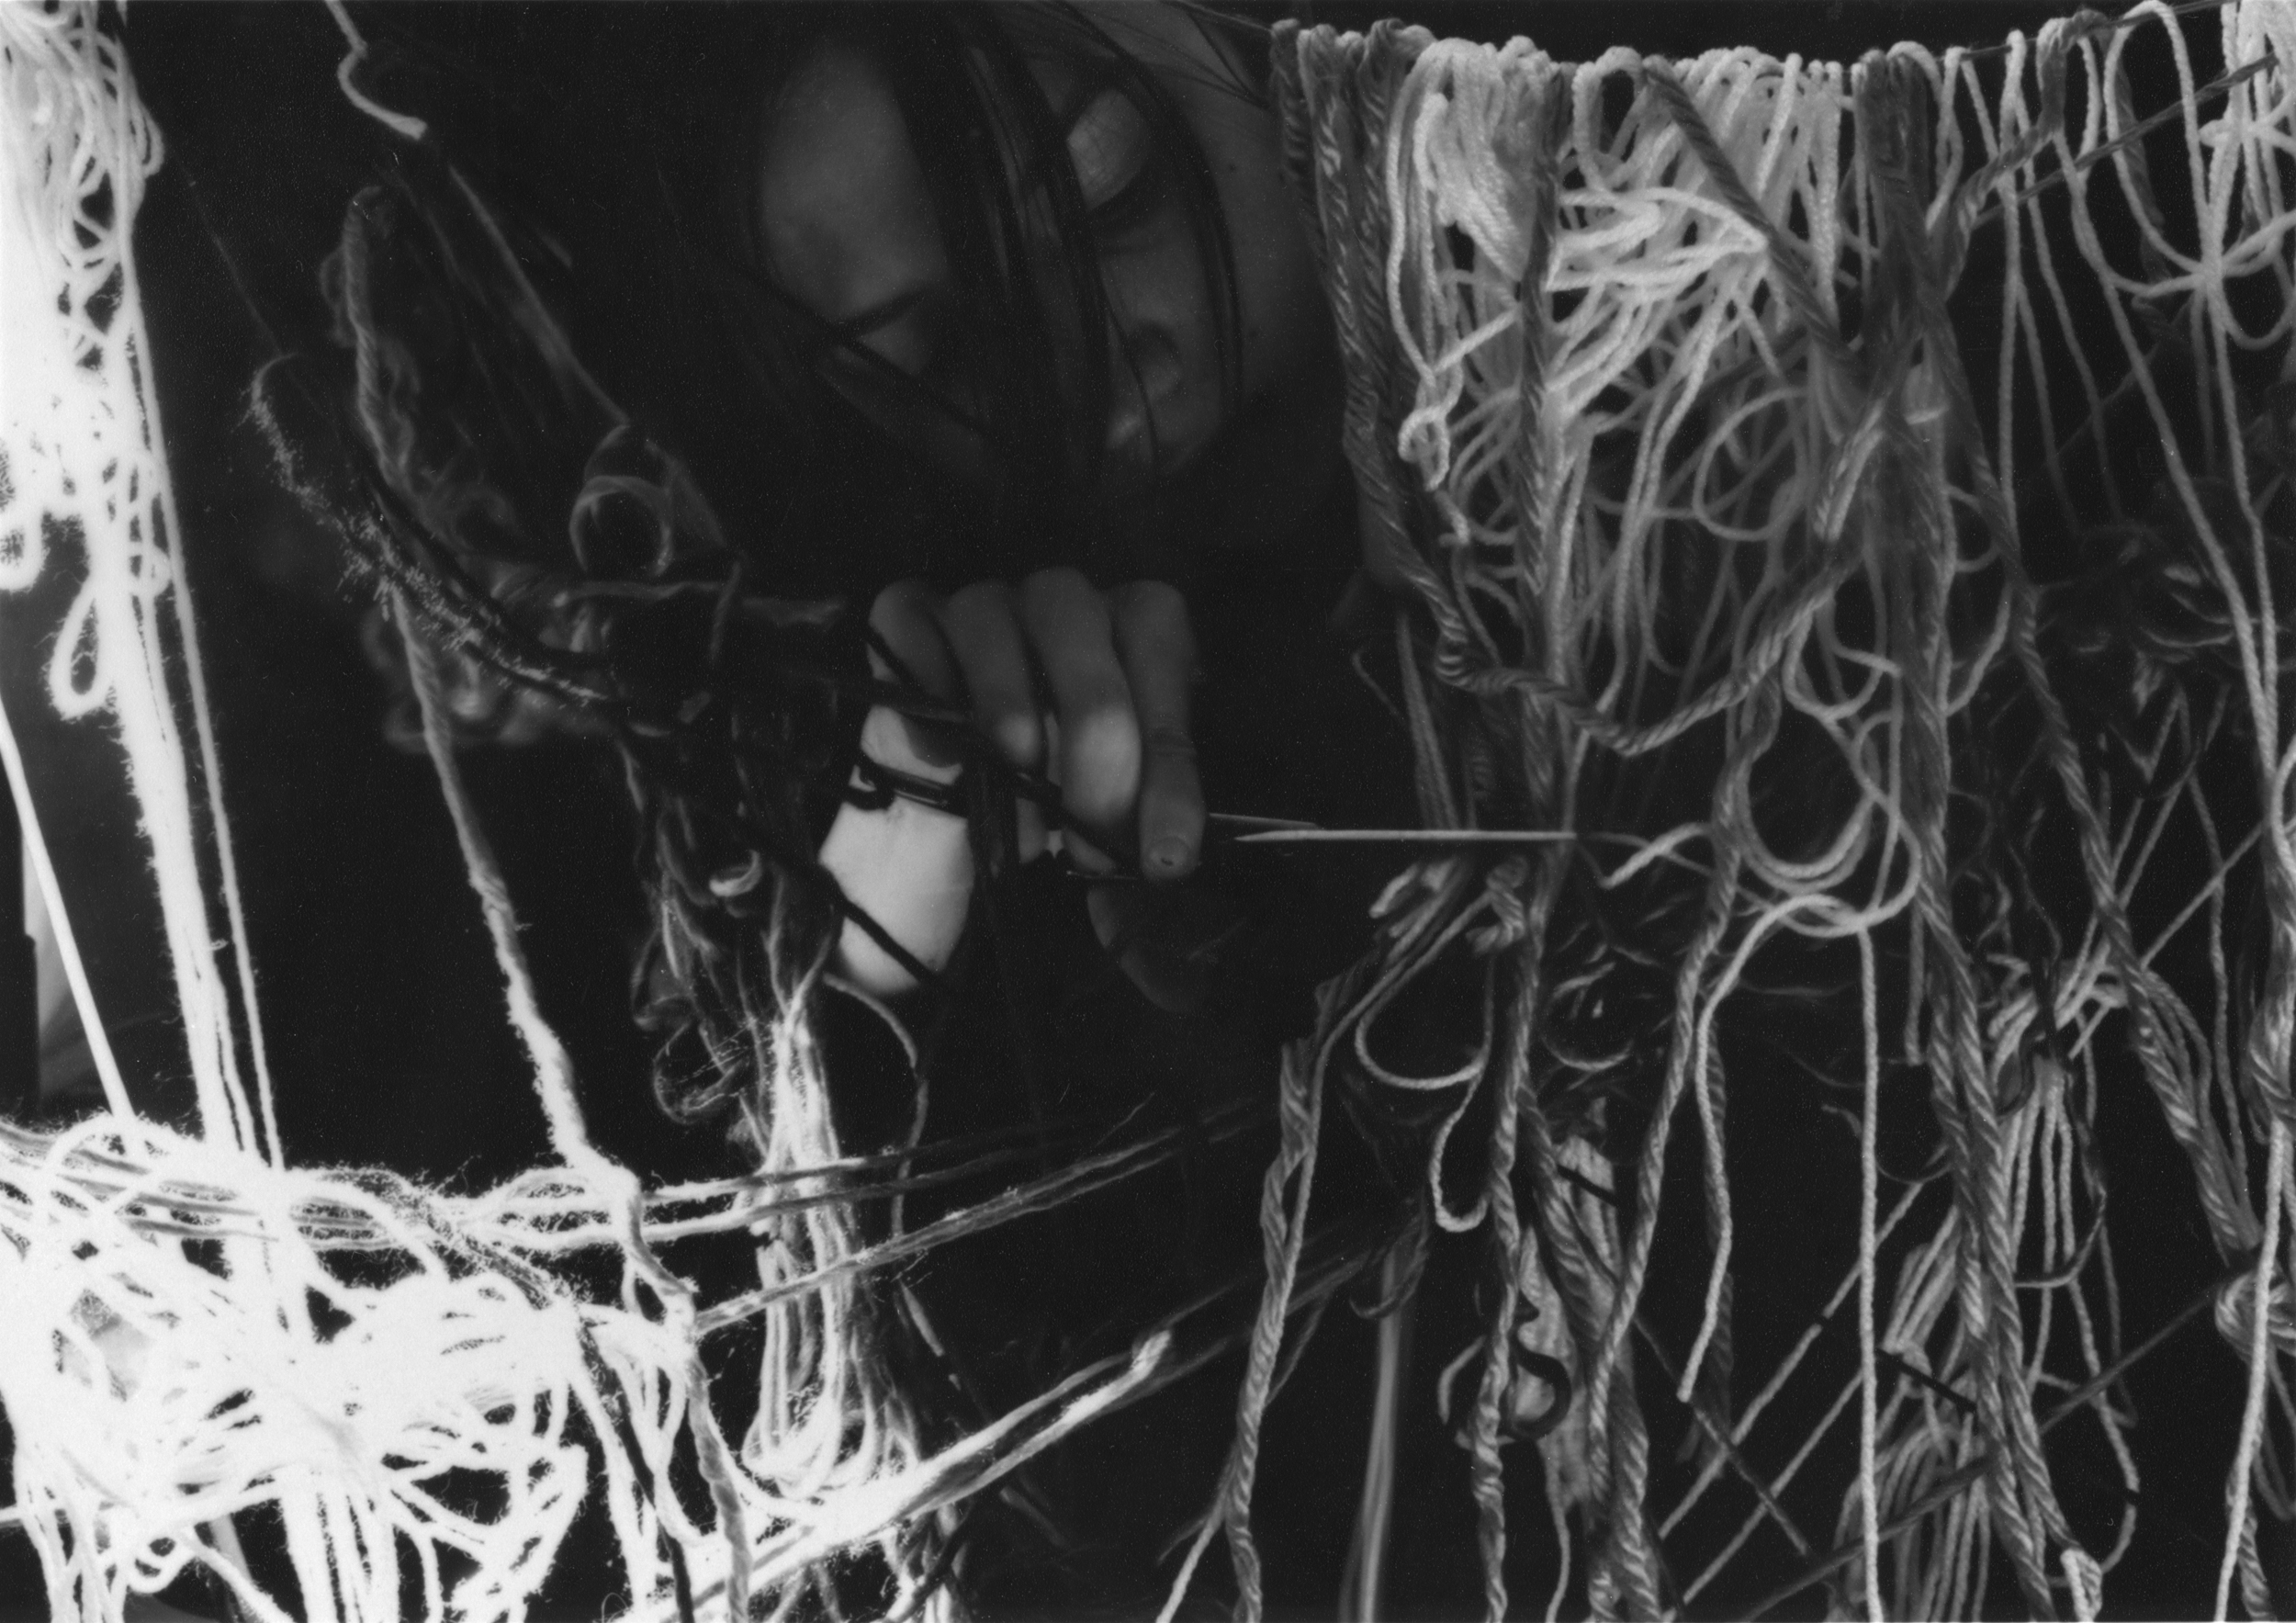 Black and white gelatin silver print of a woman looking down as she cuts through a wall of tangled yarn with scissors